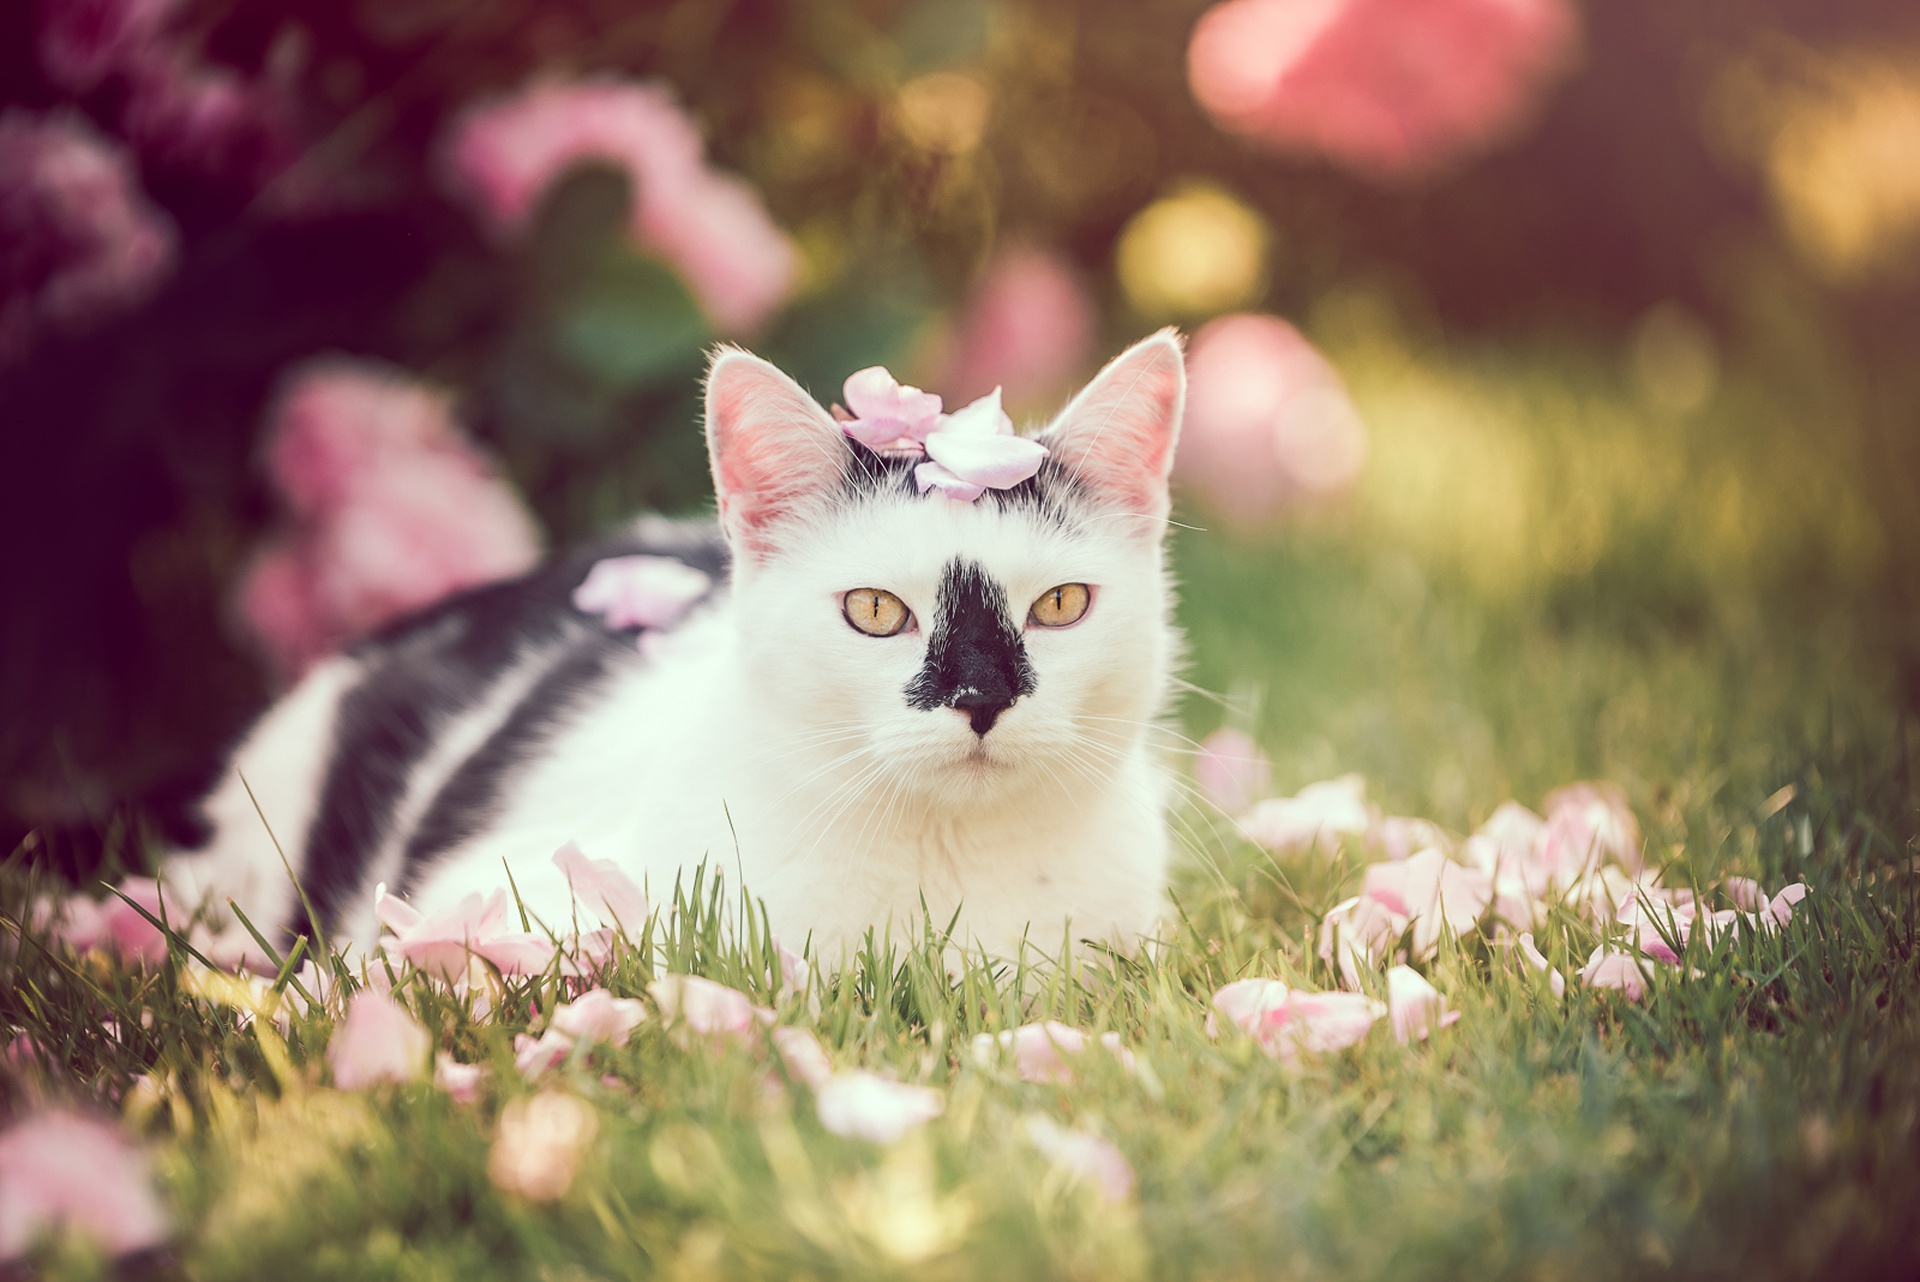 General 1920x1282 cats animals mammals colorful outdoors plants grass yellow eyes animal eyes leaves closeup